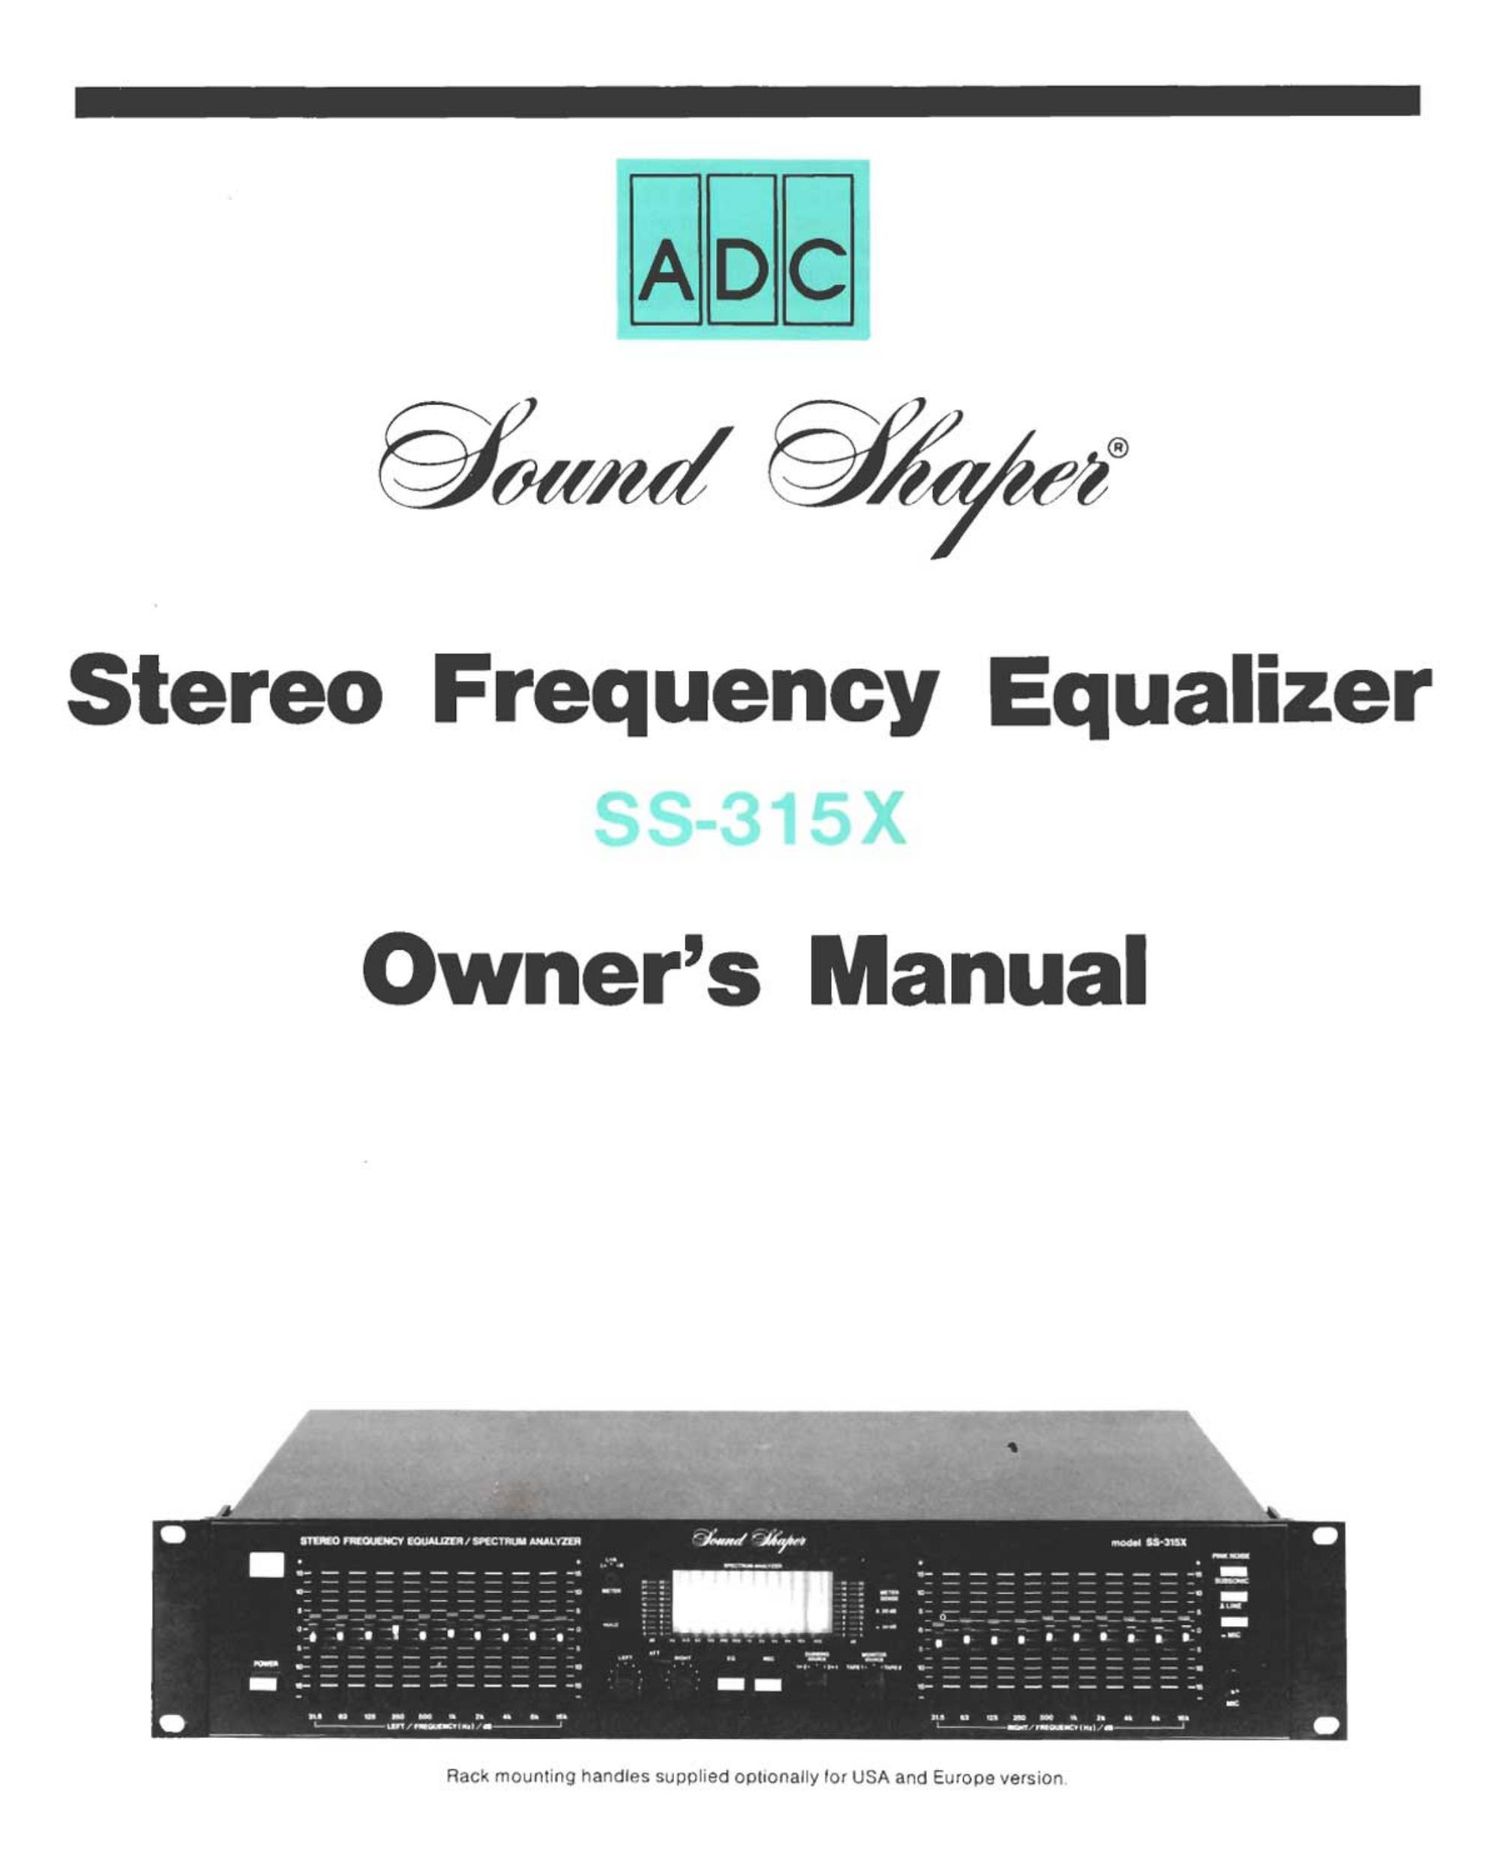 adc soundshaper 315 x owners manual